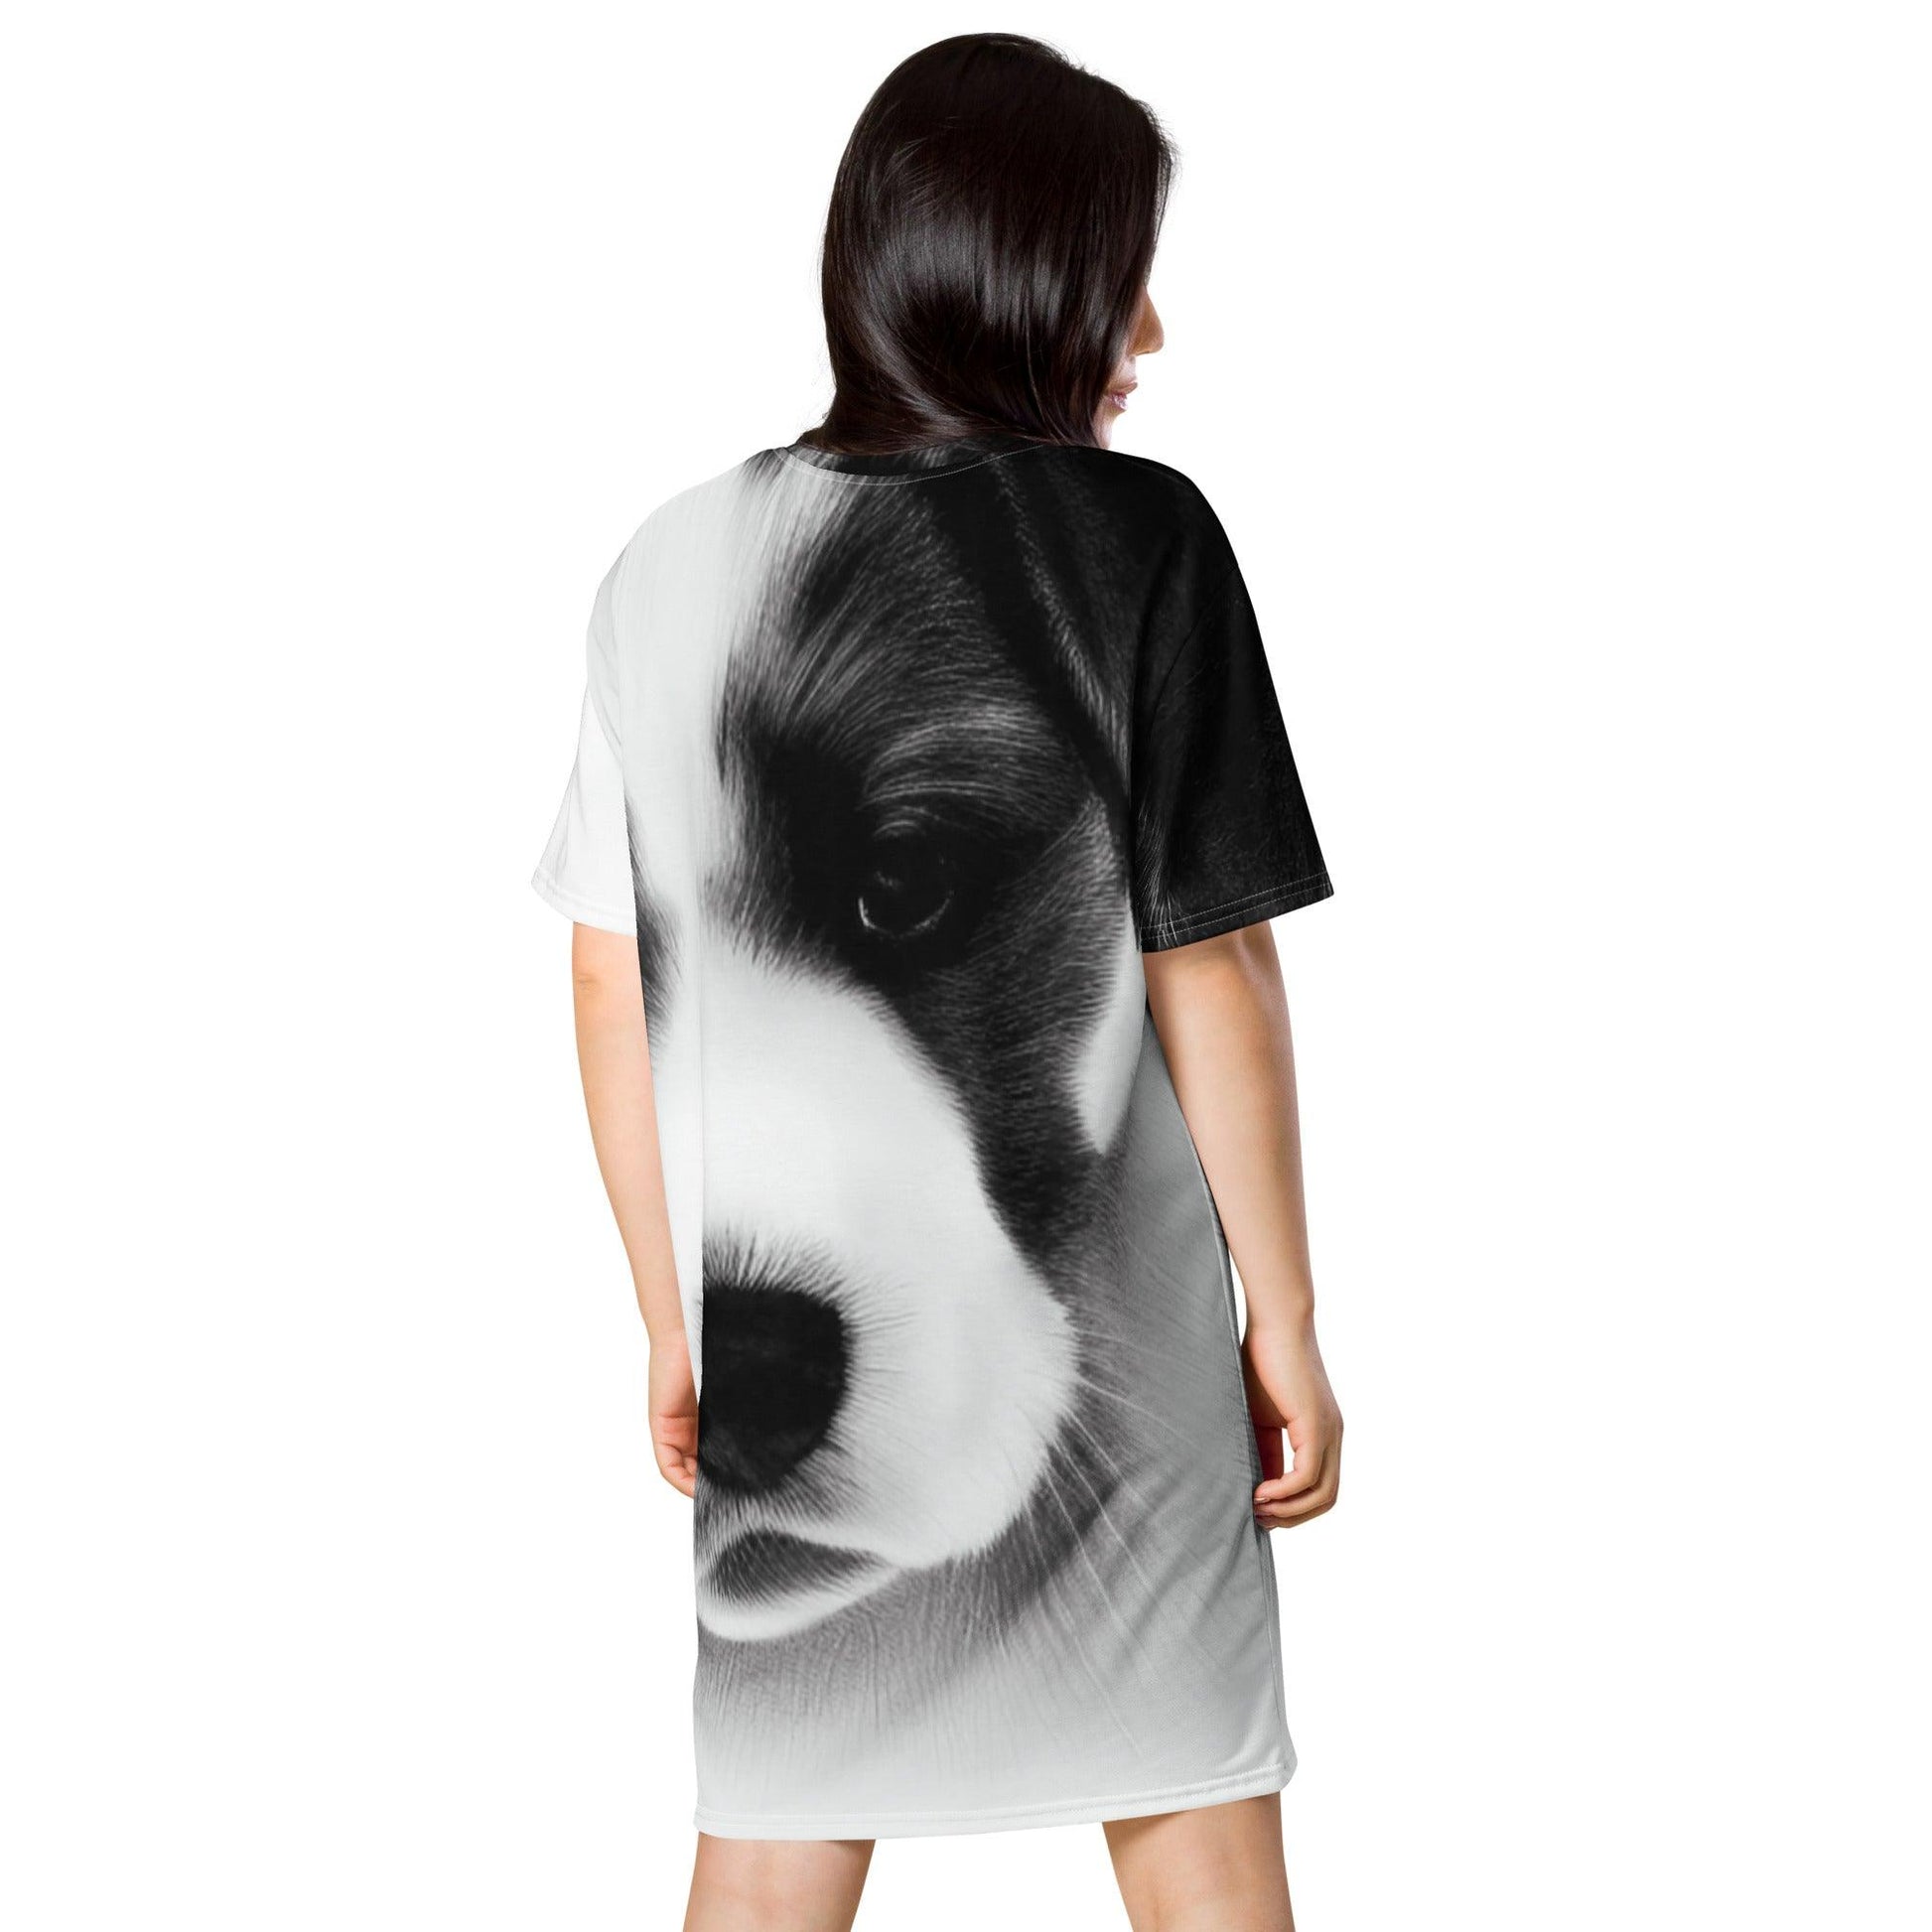 Puppy Love 5 - Womens T-Shirt Dress - iSAW Company